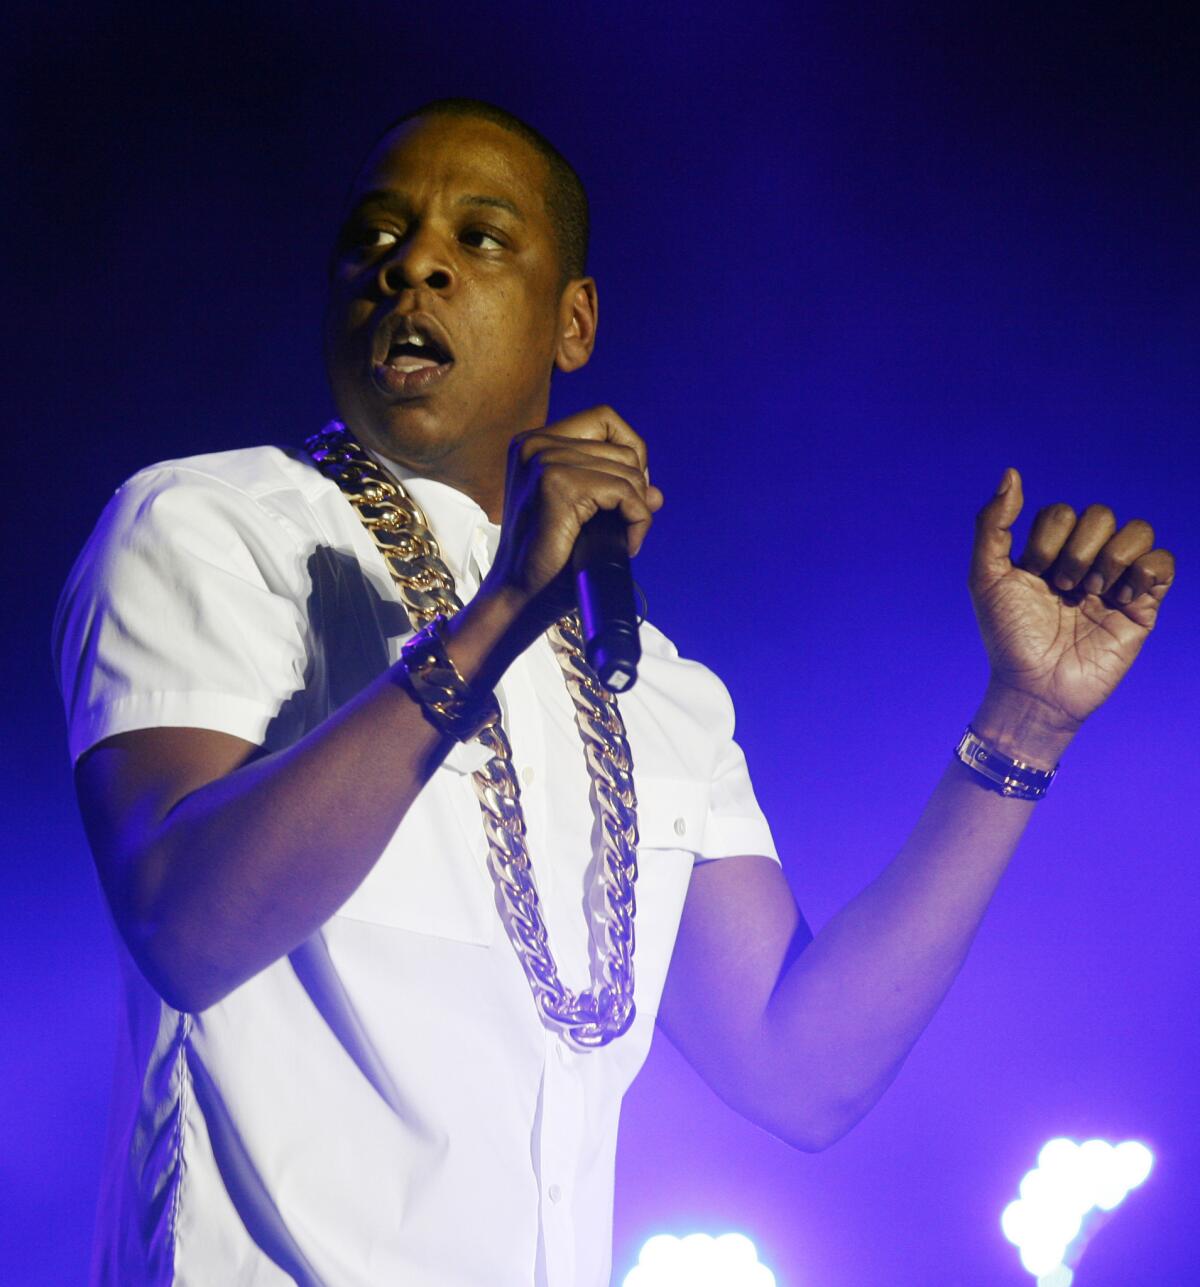 Jay Z, seen performing at the Wireless Festival in London over the summer, has teamed with Barneys on its holiday collection.